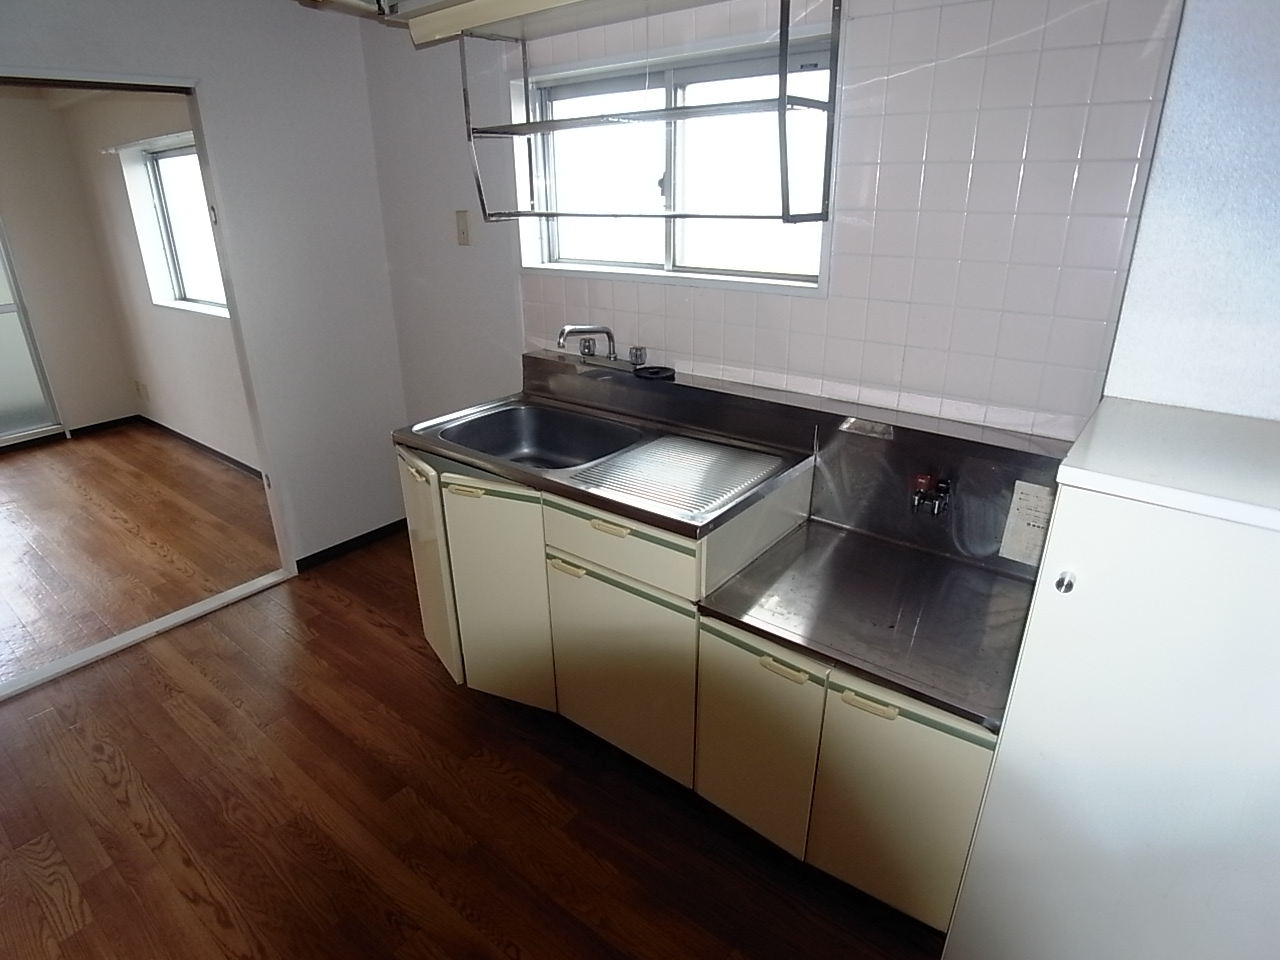 Kitchen. Kitchen (gas two-burner stove installation Allowed) cooking window with with space (ventilation good